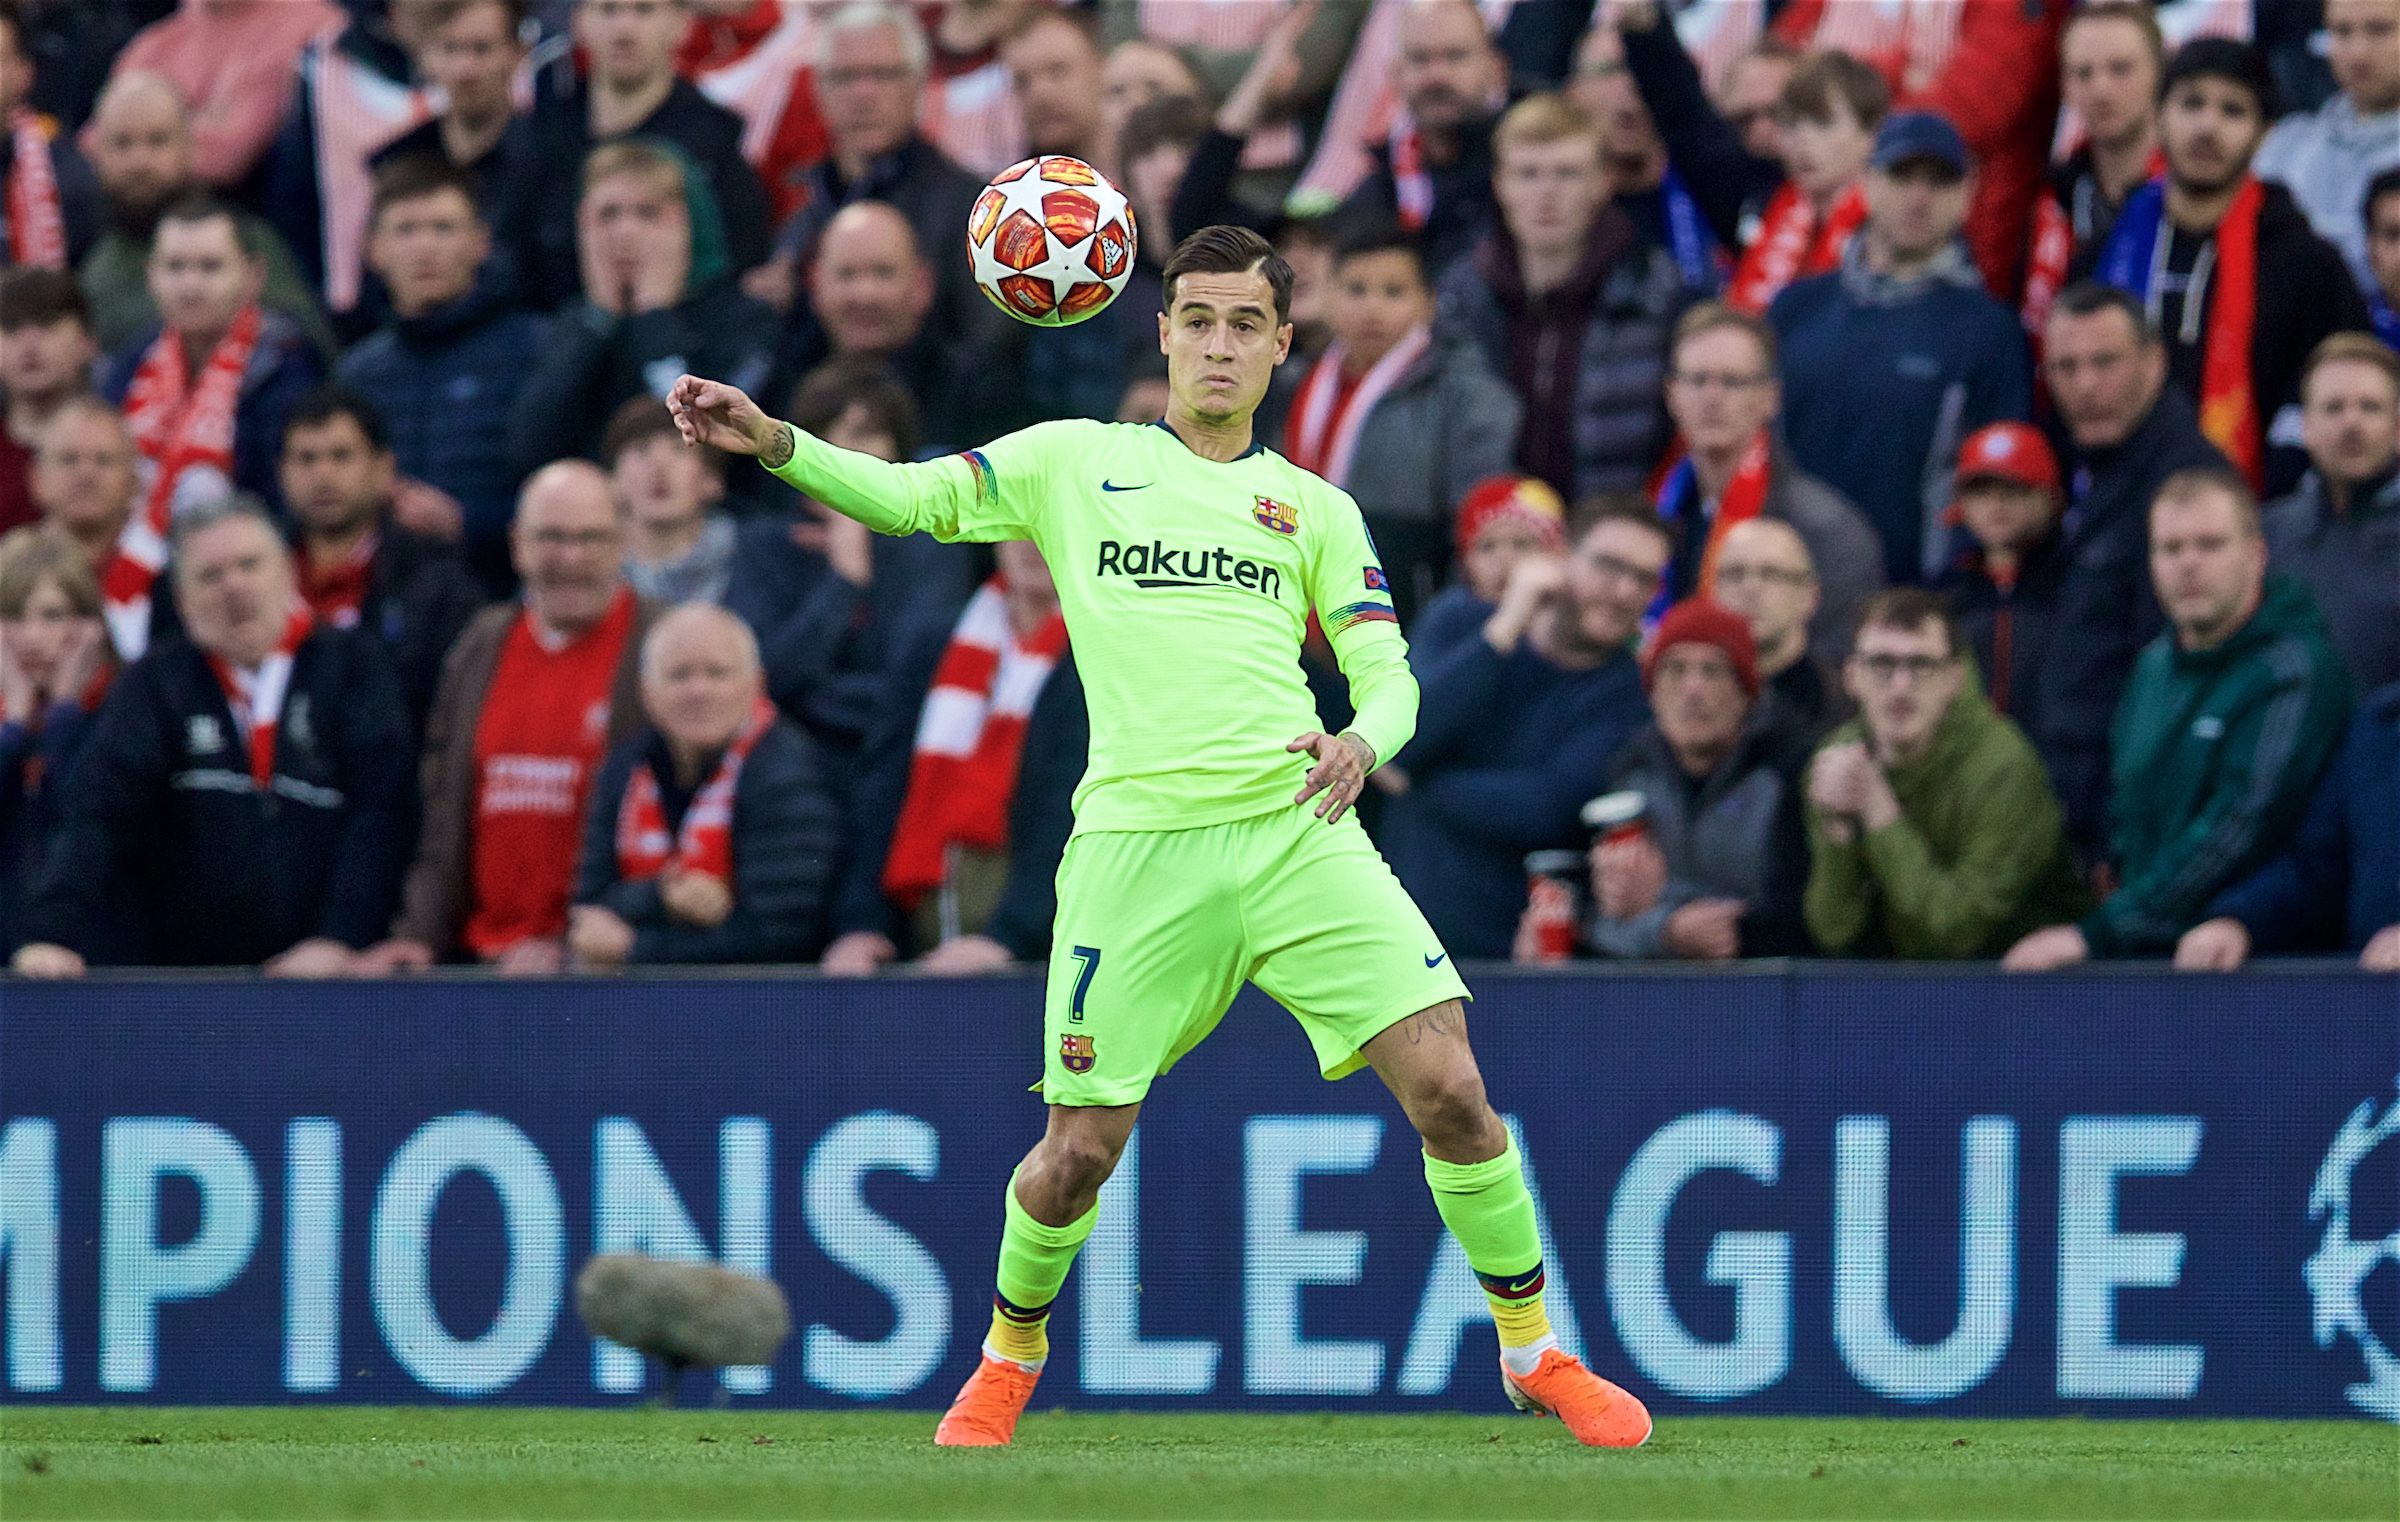 LIVERPOOL, ENGLAND - Tuesday, May 7, 2019: FC Barcelona's Philippe Coutinho Correia during the UEFA Champions League Semi-Final 2nd Leg match between Liverpool FC and FC Barcelona at Anfield. (Pic by David Rawcliffe/Propaganda)